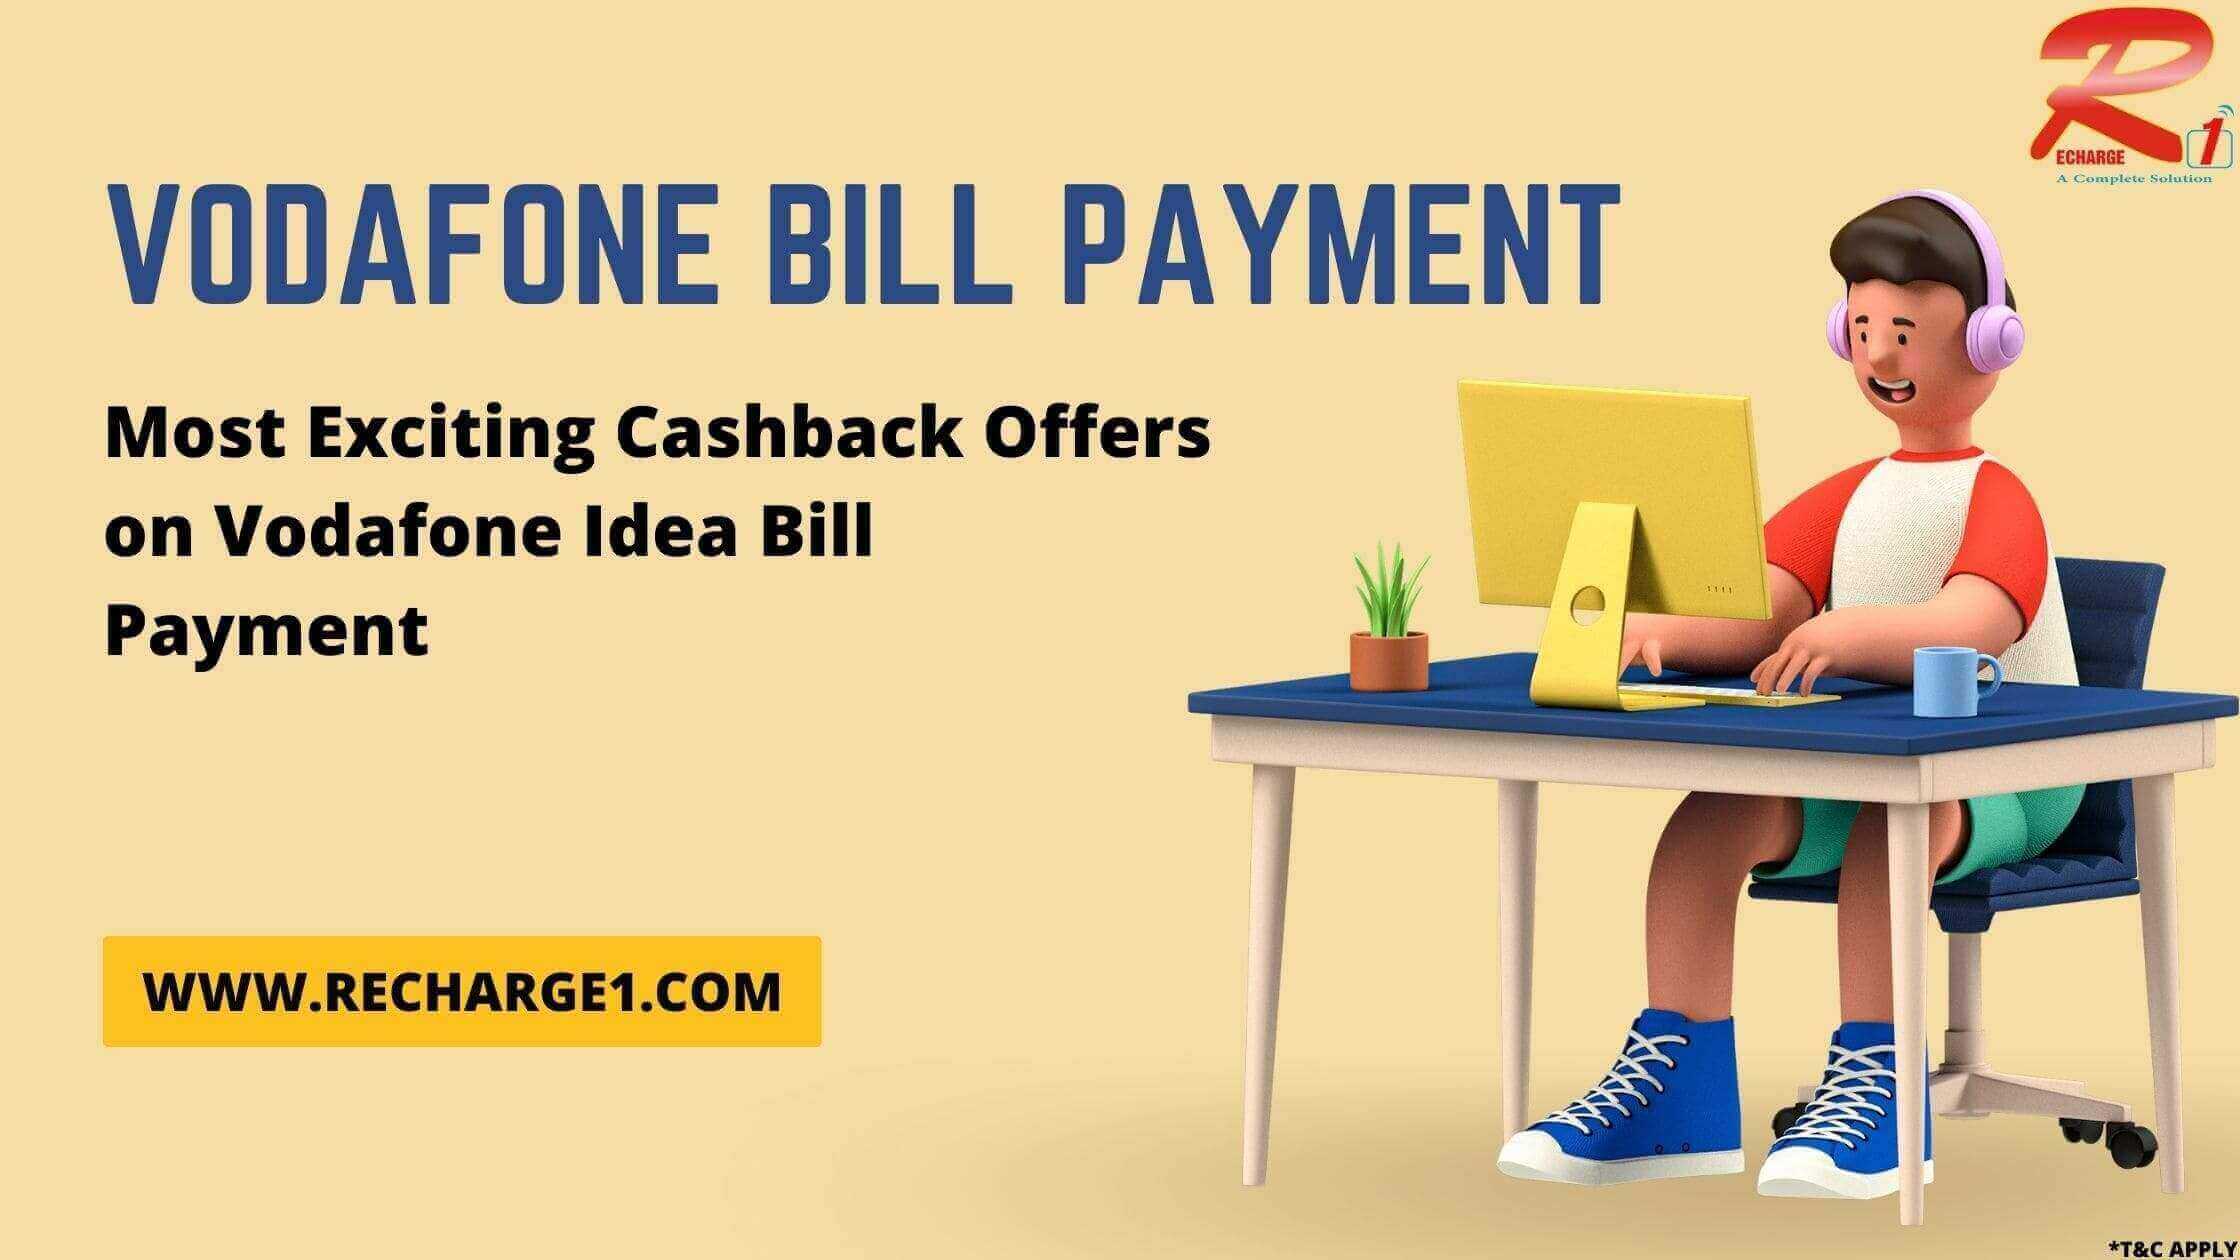 Vodafone Bill Payment – Most Exciting Cashback Offers on Vodafone Idea Bill Payment